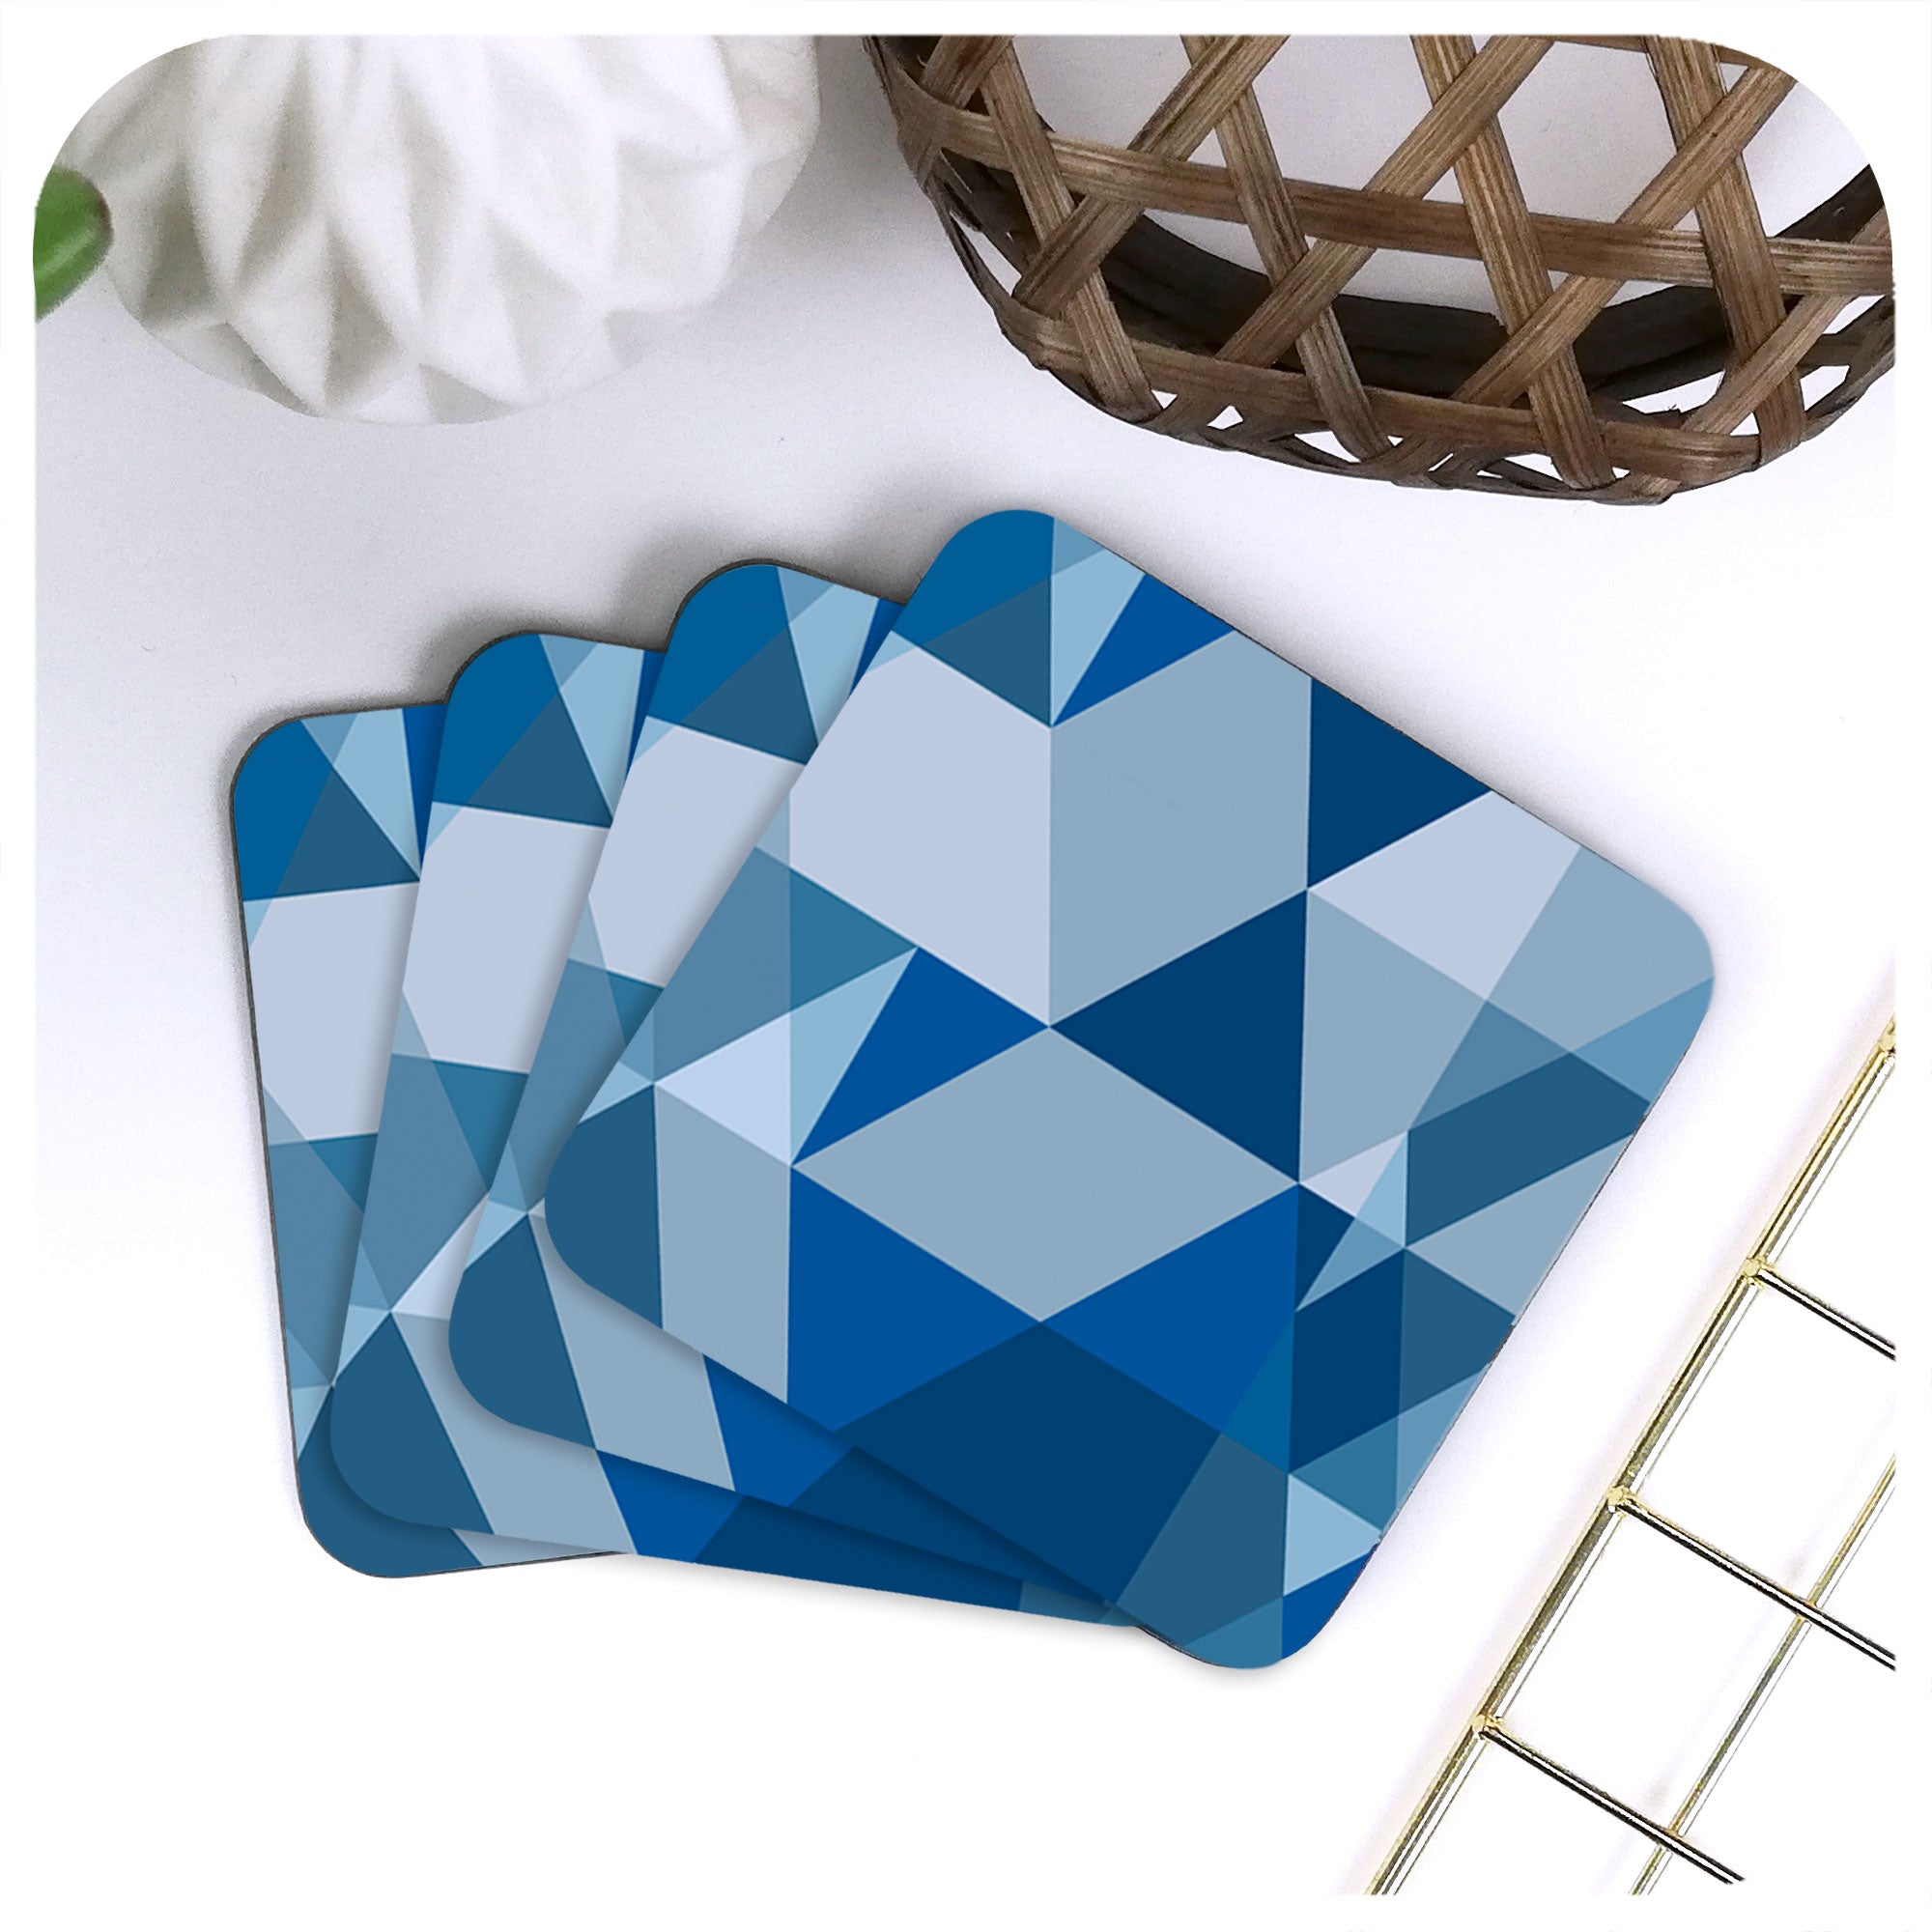 Scandi Geometric Coasters in Blue and Grey, set of four displayed in a fan | The Inkabilly Emporium